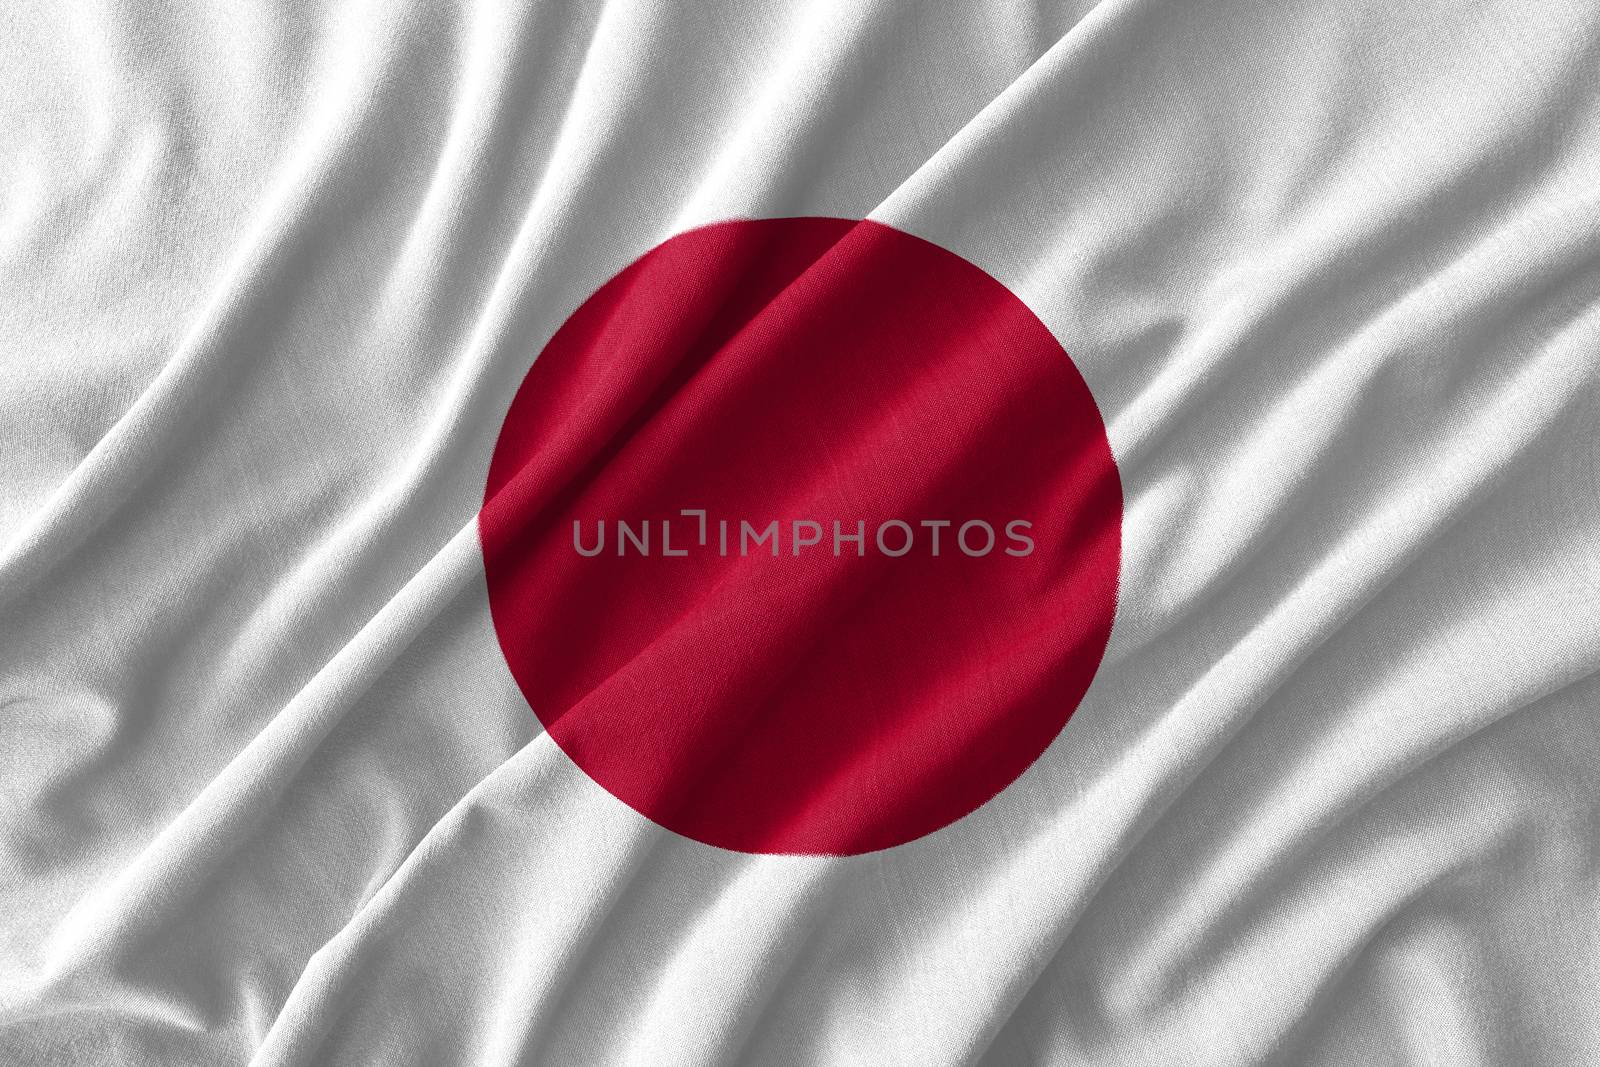 Japan flag painting on high detail of wave cotton fabrics . 3D illustration .